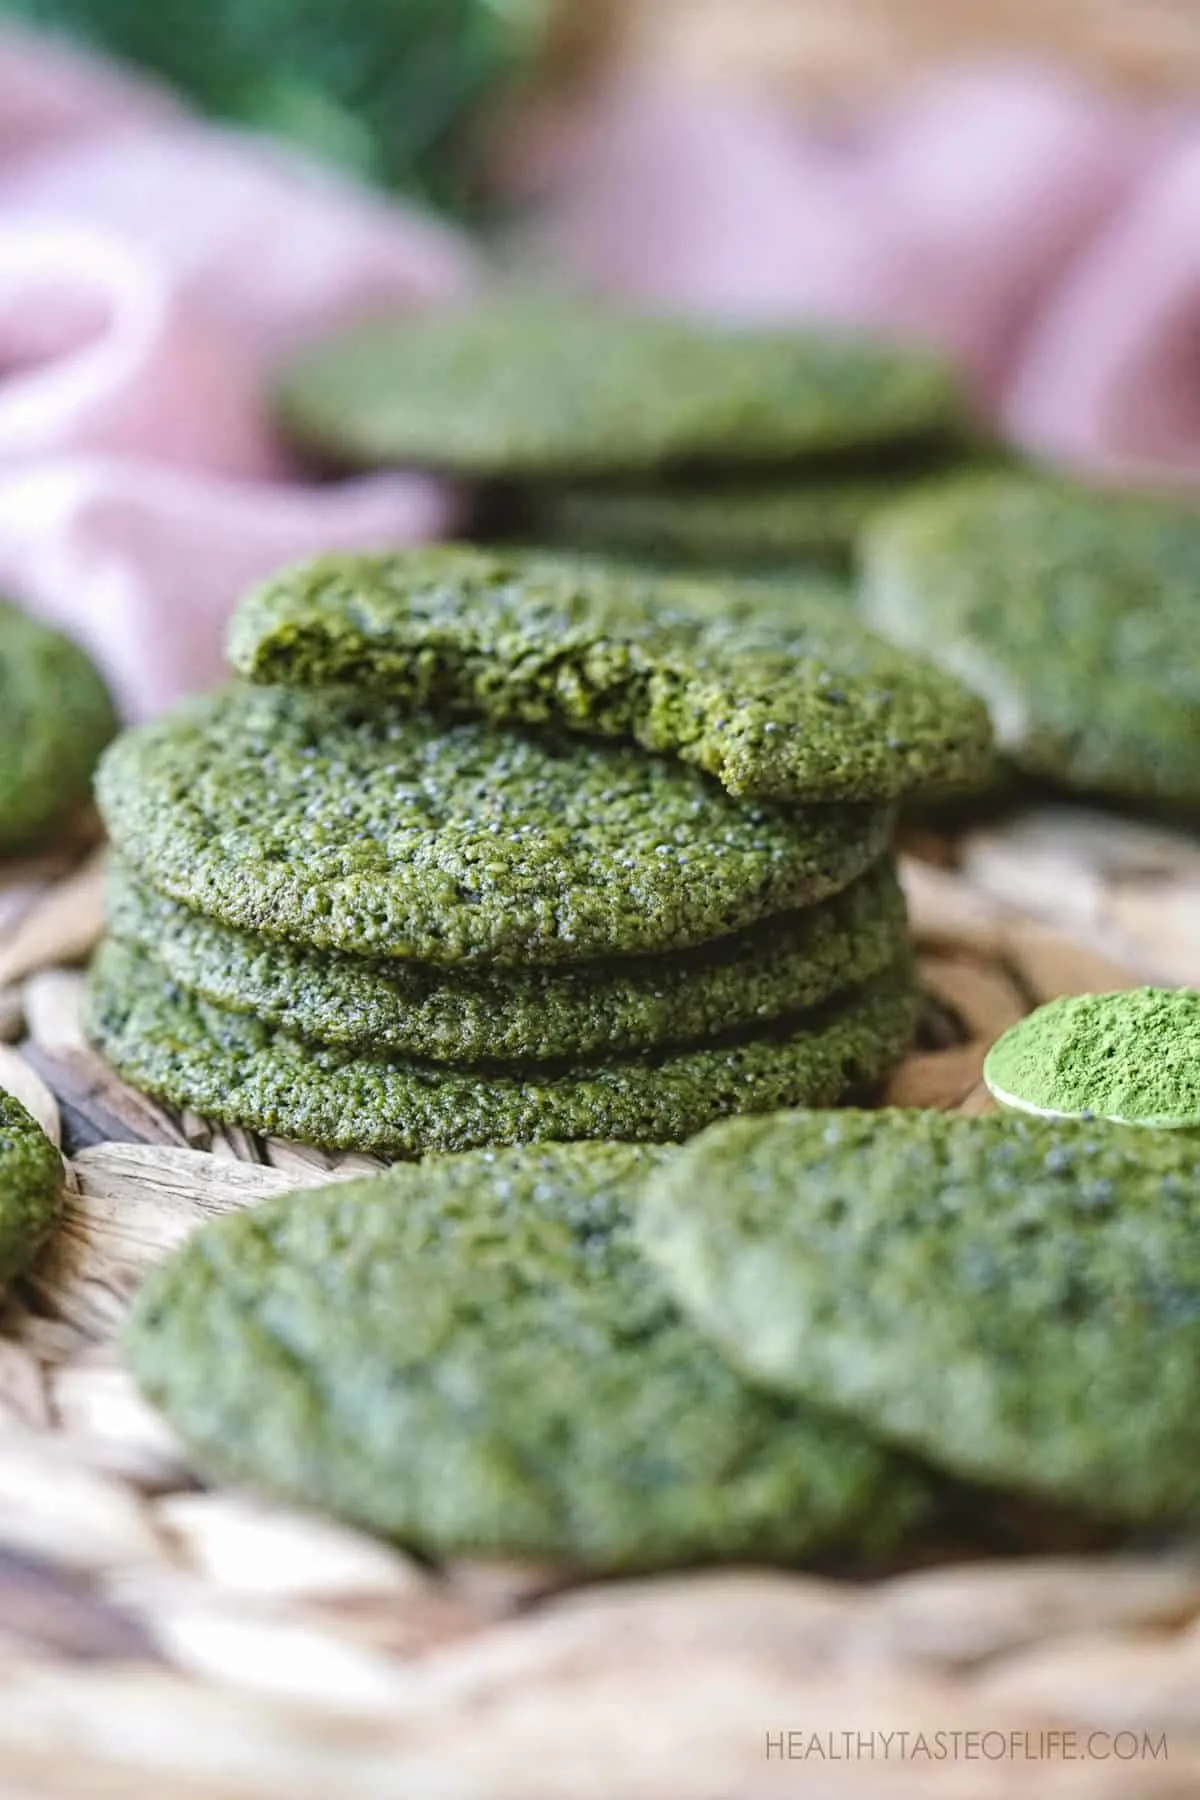 Healthy Vegan Matcha Cookies Recipe - Gluten Free Matcha cookies with oatmeal and seeds. Easy matcha cookie recipe without refined sugar and egg. Chewy, crisp and delicious #matchacookies #recipe #healthy #vegan #glutenfreecookies #matchasugarcookies 